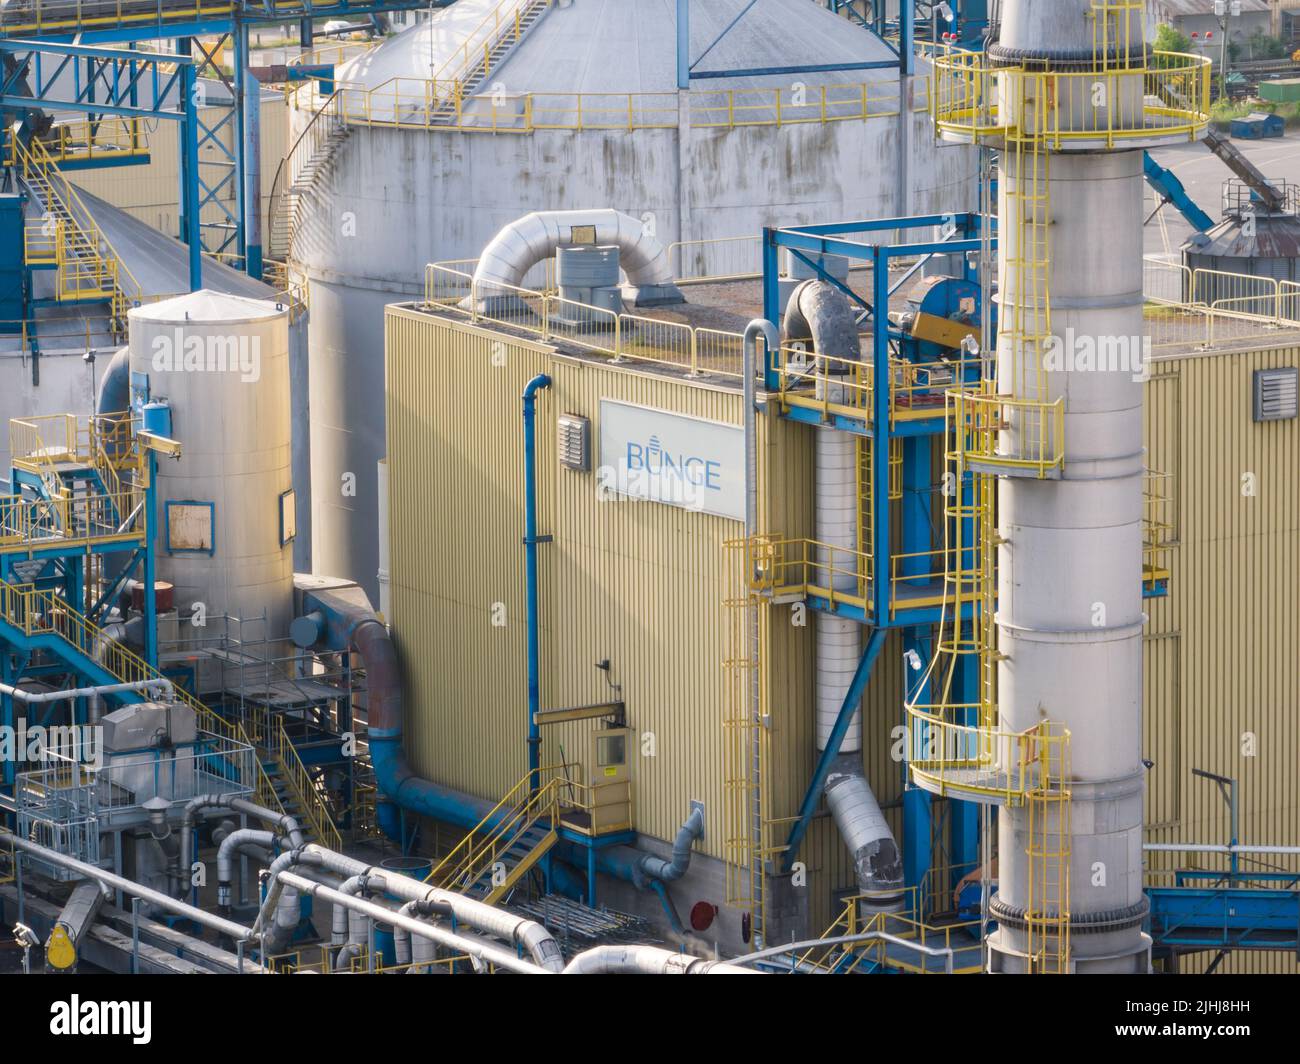 The Bunge logo, an agribusiness and food ingredient company, is seen on the side of an oilseed processing plant in Hamilton. Stock Photo